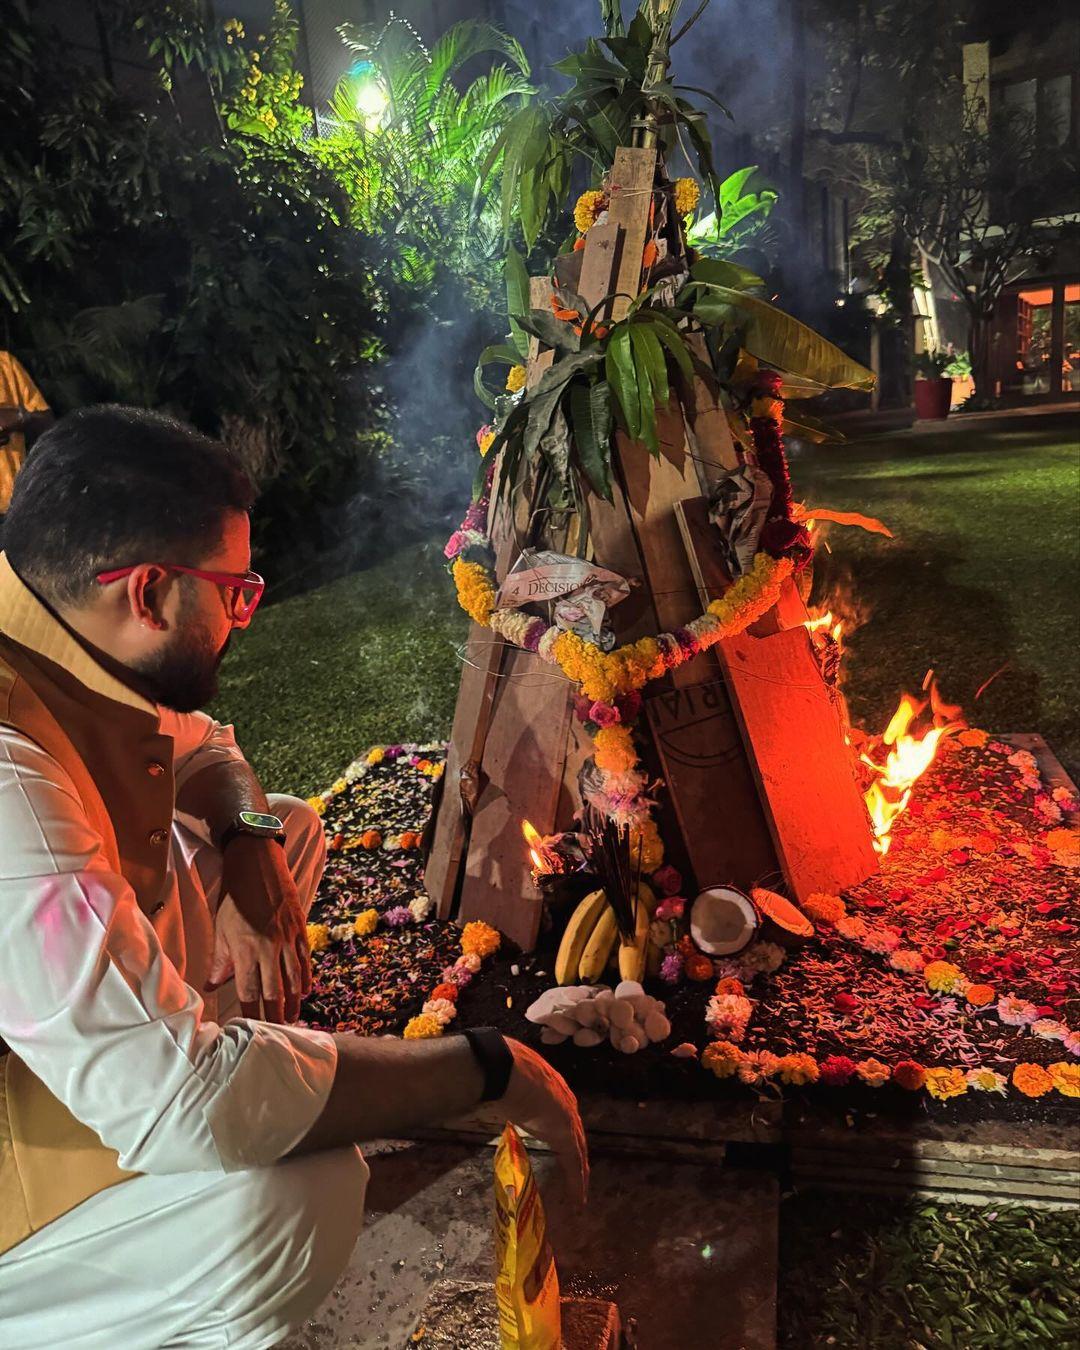 Yesterday night, the Bachchan Parivaar also celebrated the Holika Dahan together